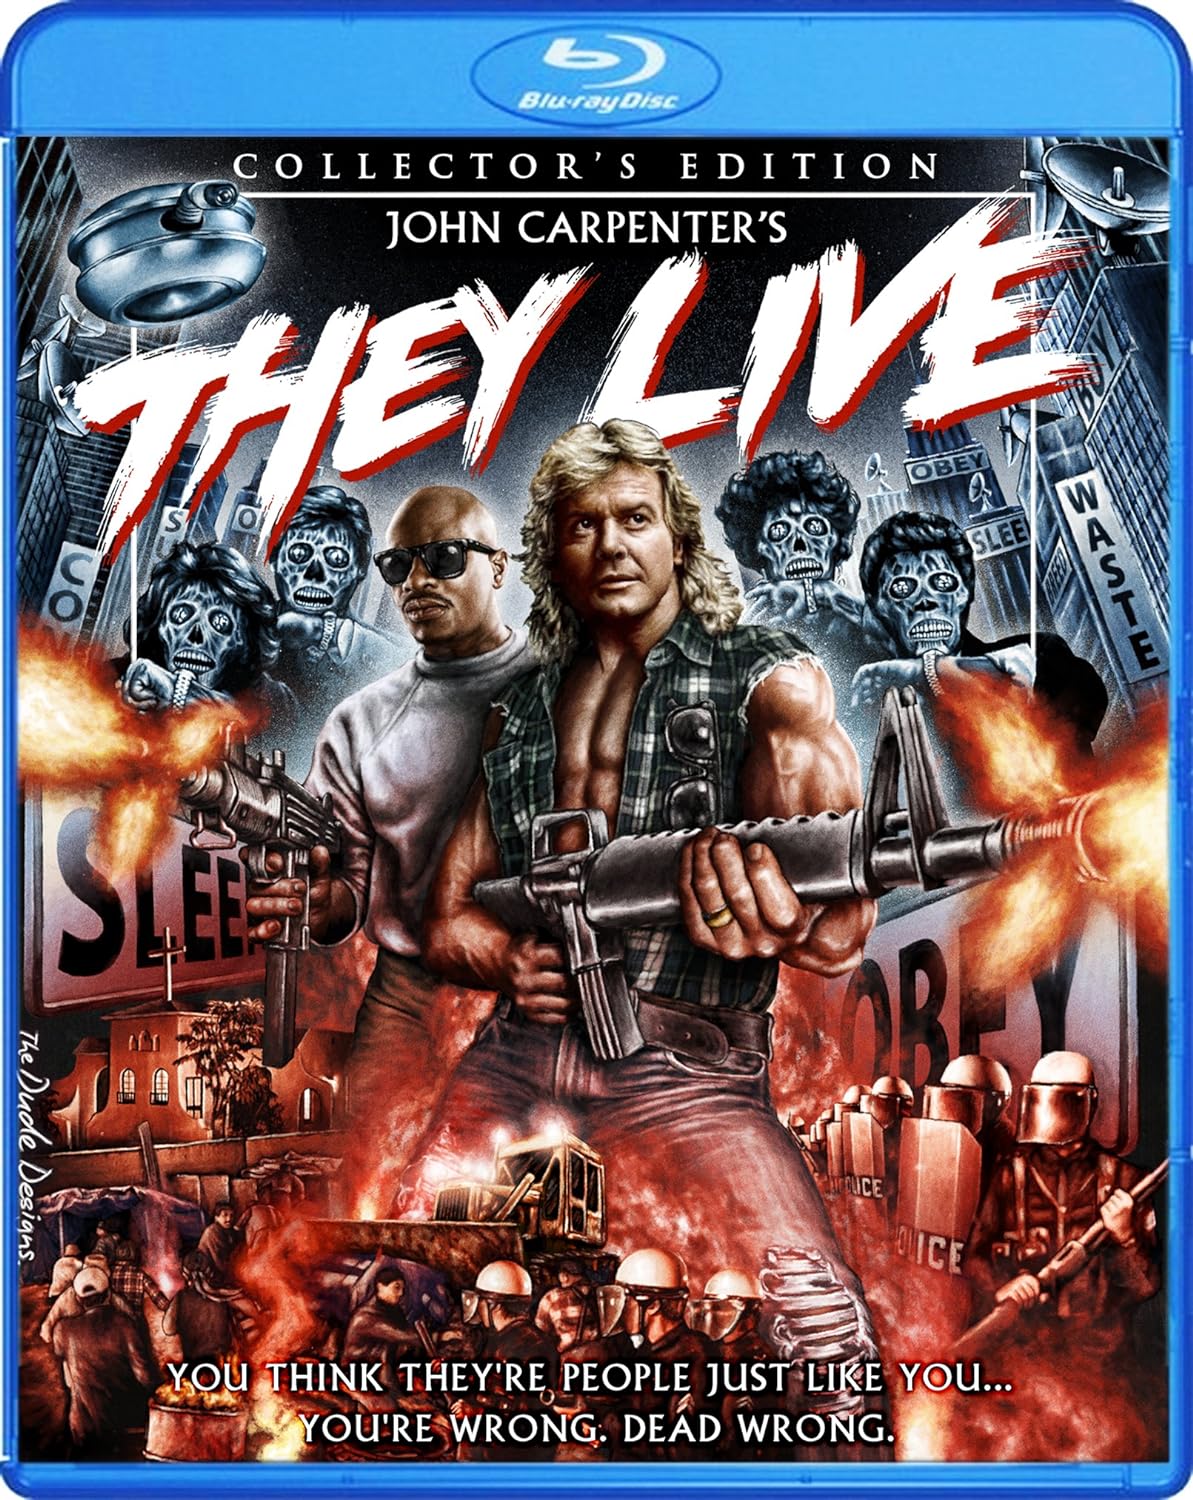 THEY LIVE (1988)